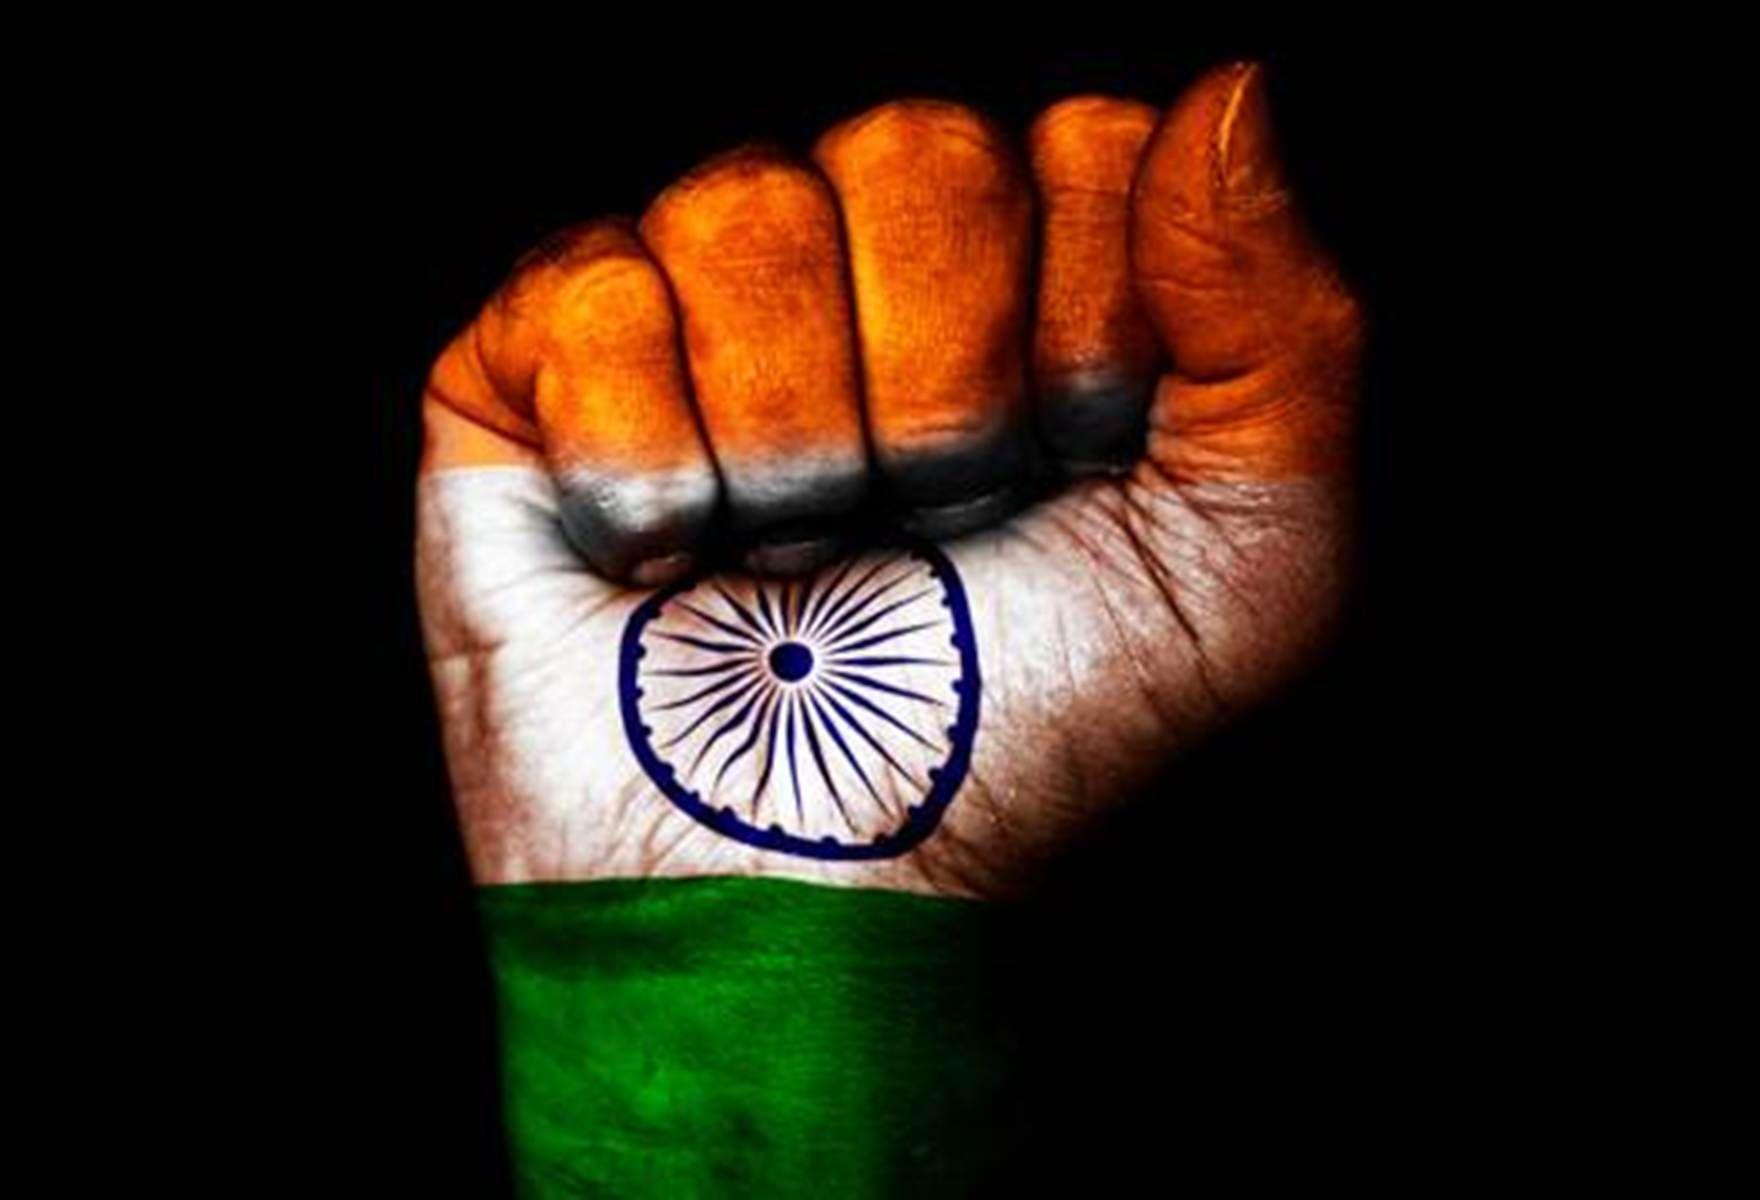 Indian Flag Image & Wallpaper That Makes Every Indian Proud